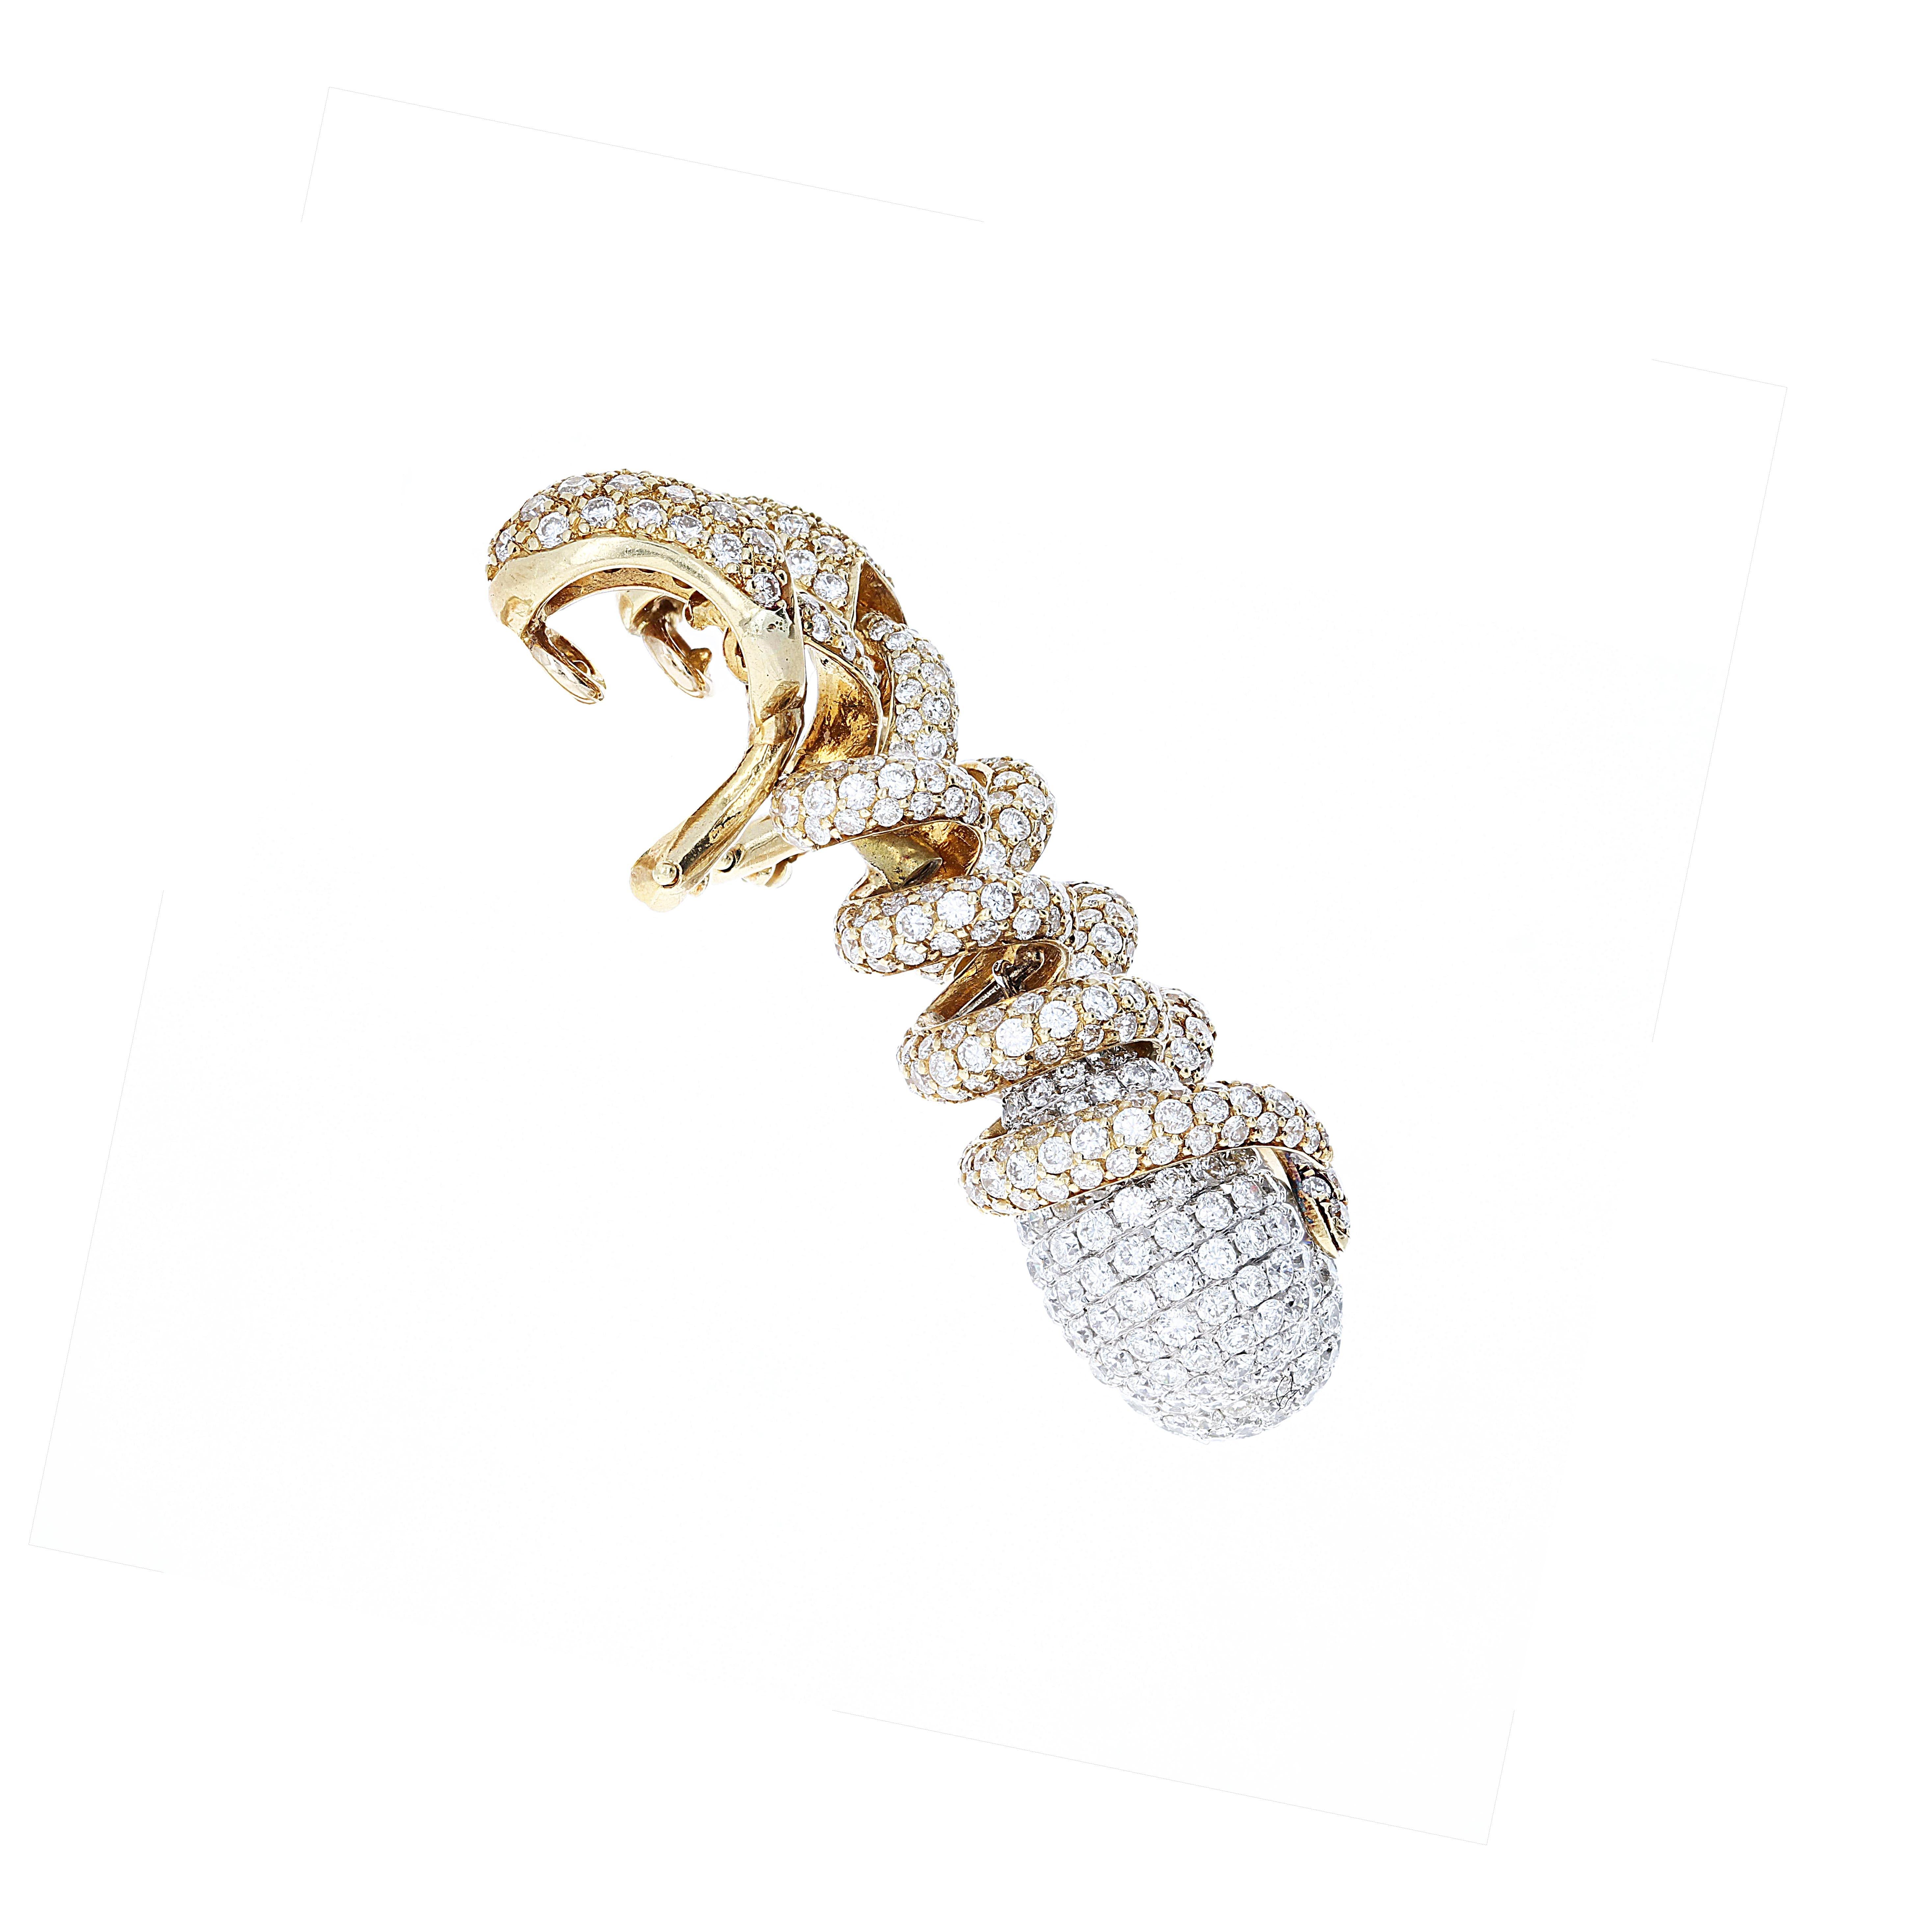 These are such a cool pair of earrings. Approximately 6.50 carats of white diamonds set in both 18kt white and yellow gold. The intertwined looks allow light to shine off all sides of the earrings. Wear them up, or wear them down. The drops move